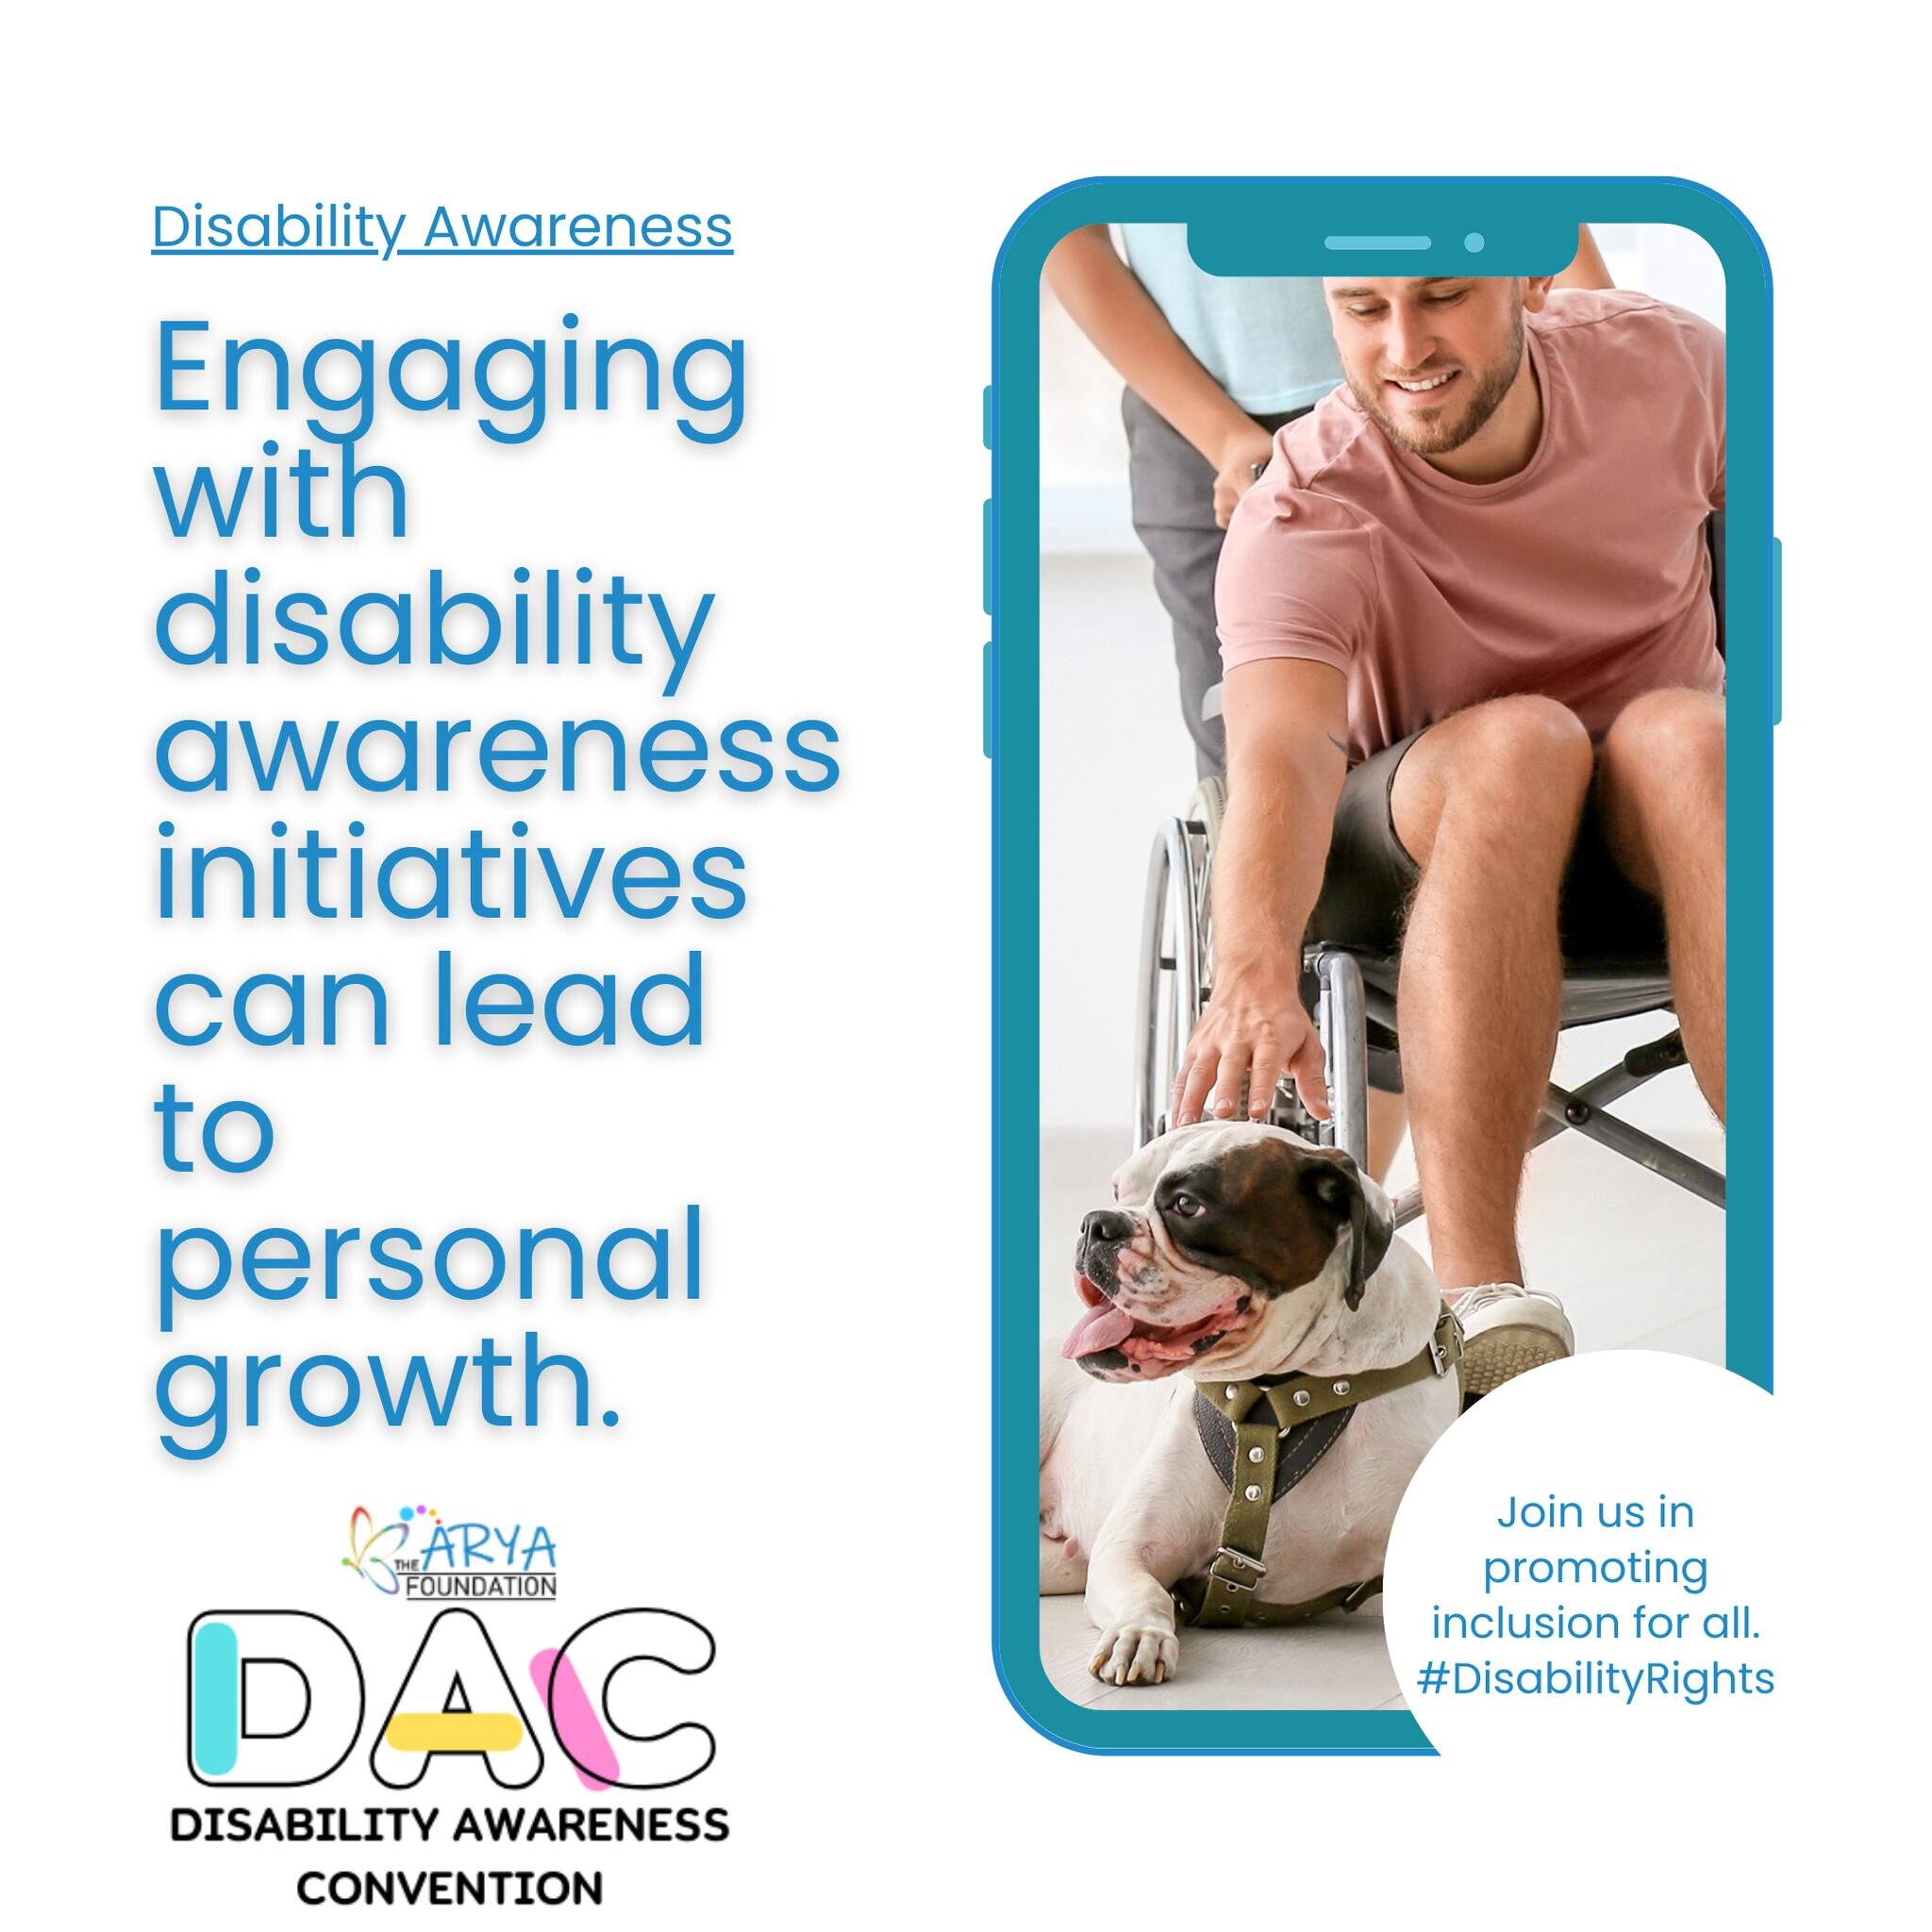 Disability Awareness Promotes Personal Growth: Engaging with disability awareness initiatives can lead to personal growth and a broader perspective, enriching the community as a whole.
https://www.facebook.com/events/389838283516819
#thearyafoundatio